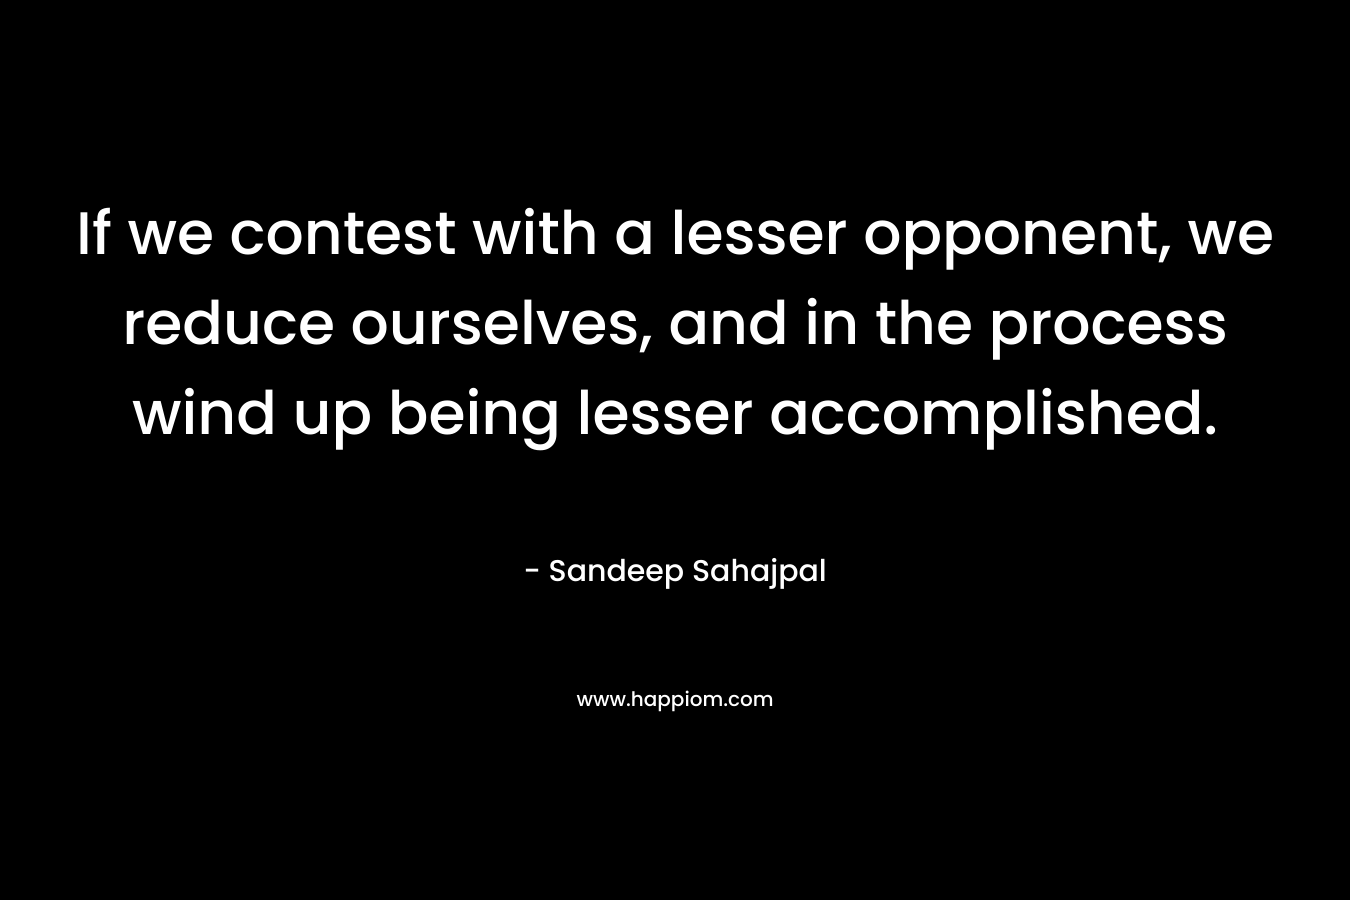 If we contest with a lesser opponent, we reduce ourselves, and in the process wind up being lesser accomplished. – Sandeep Sahajpal